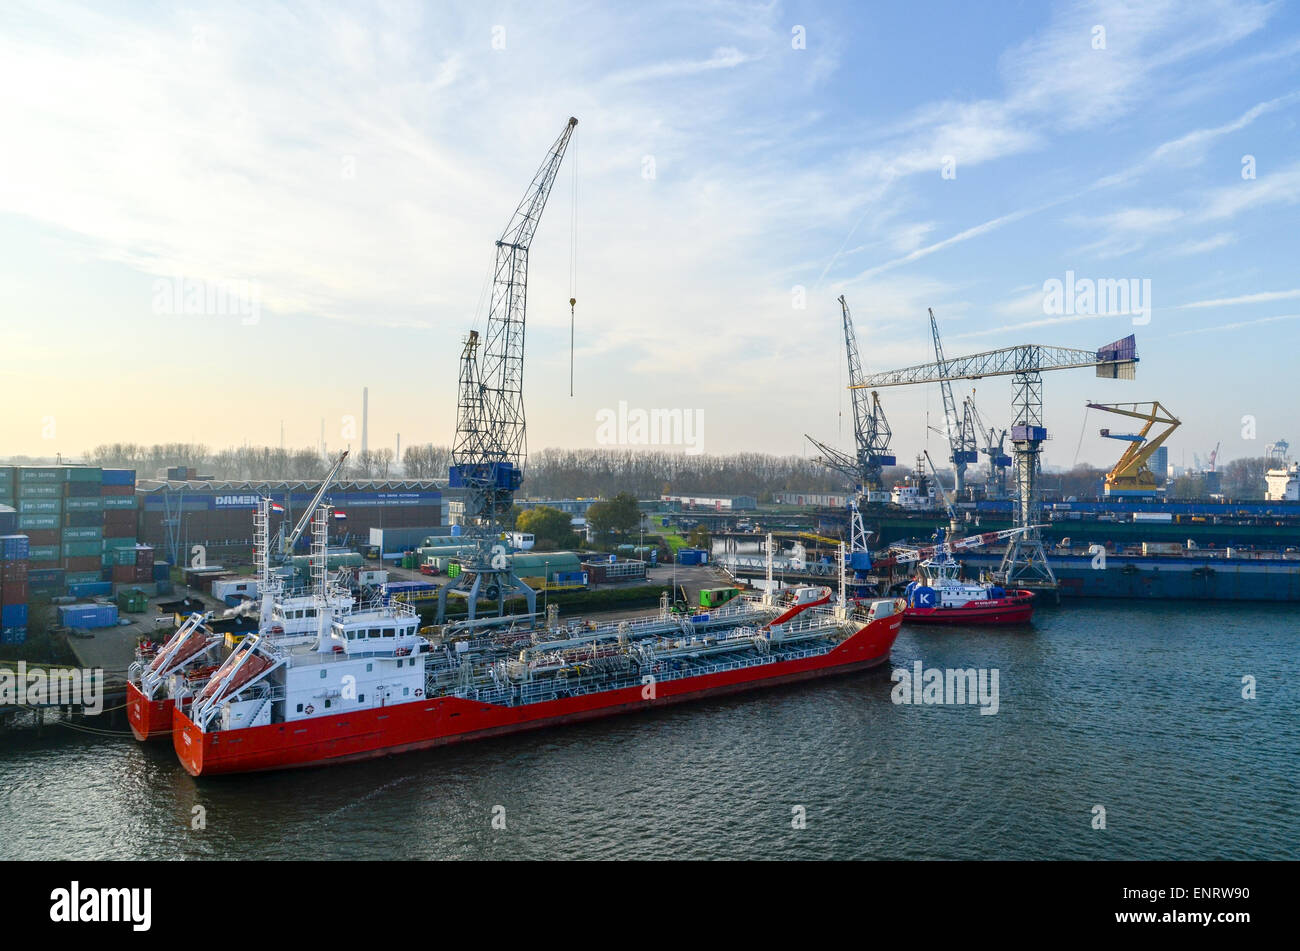 Aerial view of the dry docks and terminal of Eemhaven, Rotterdam, Netherlands Stock Photo